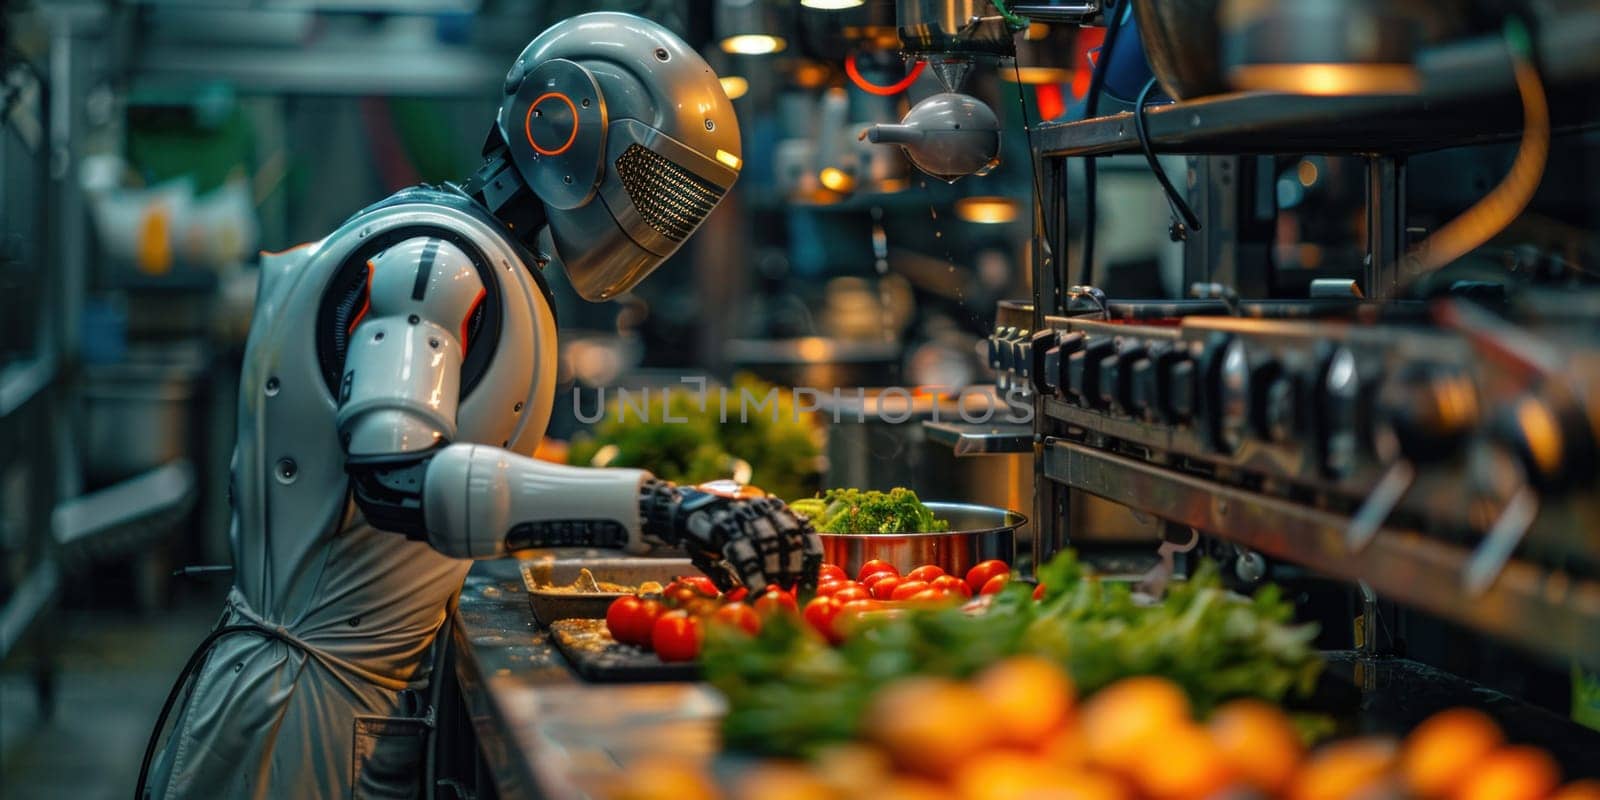 A robot is seen cooking in a kitchen, handling ingredients and using kitchen appliances to prepare a meal.